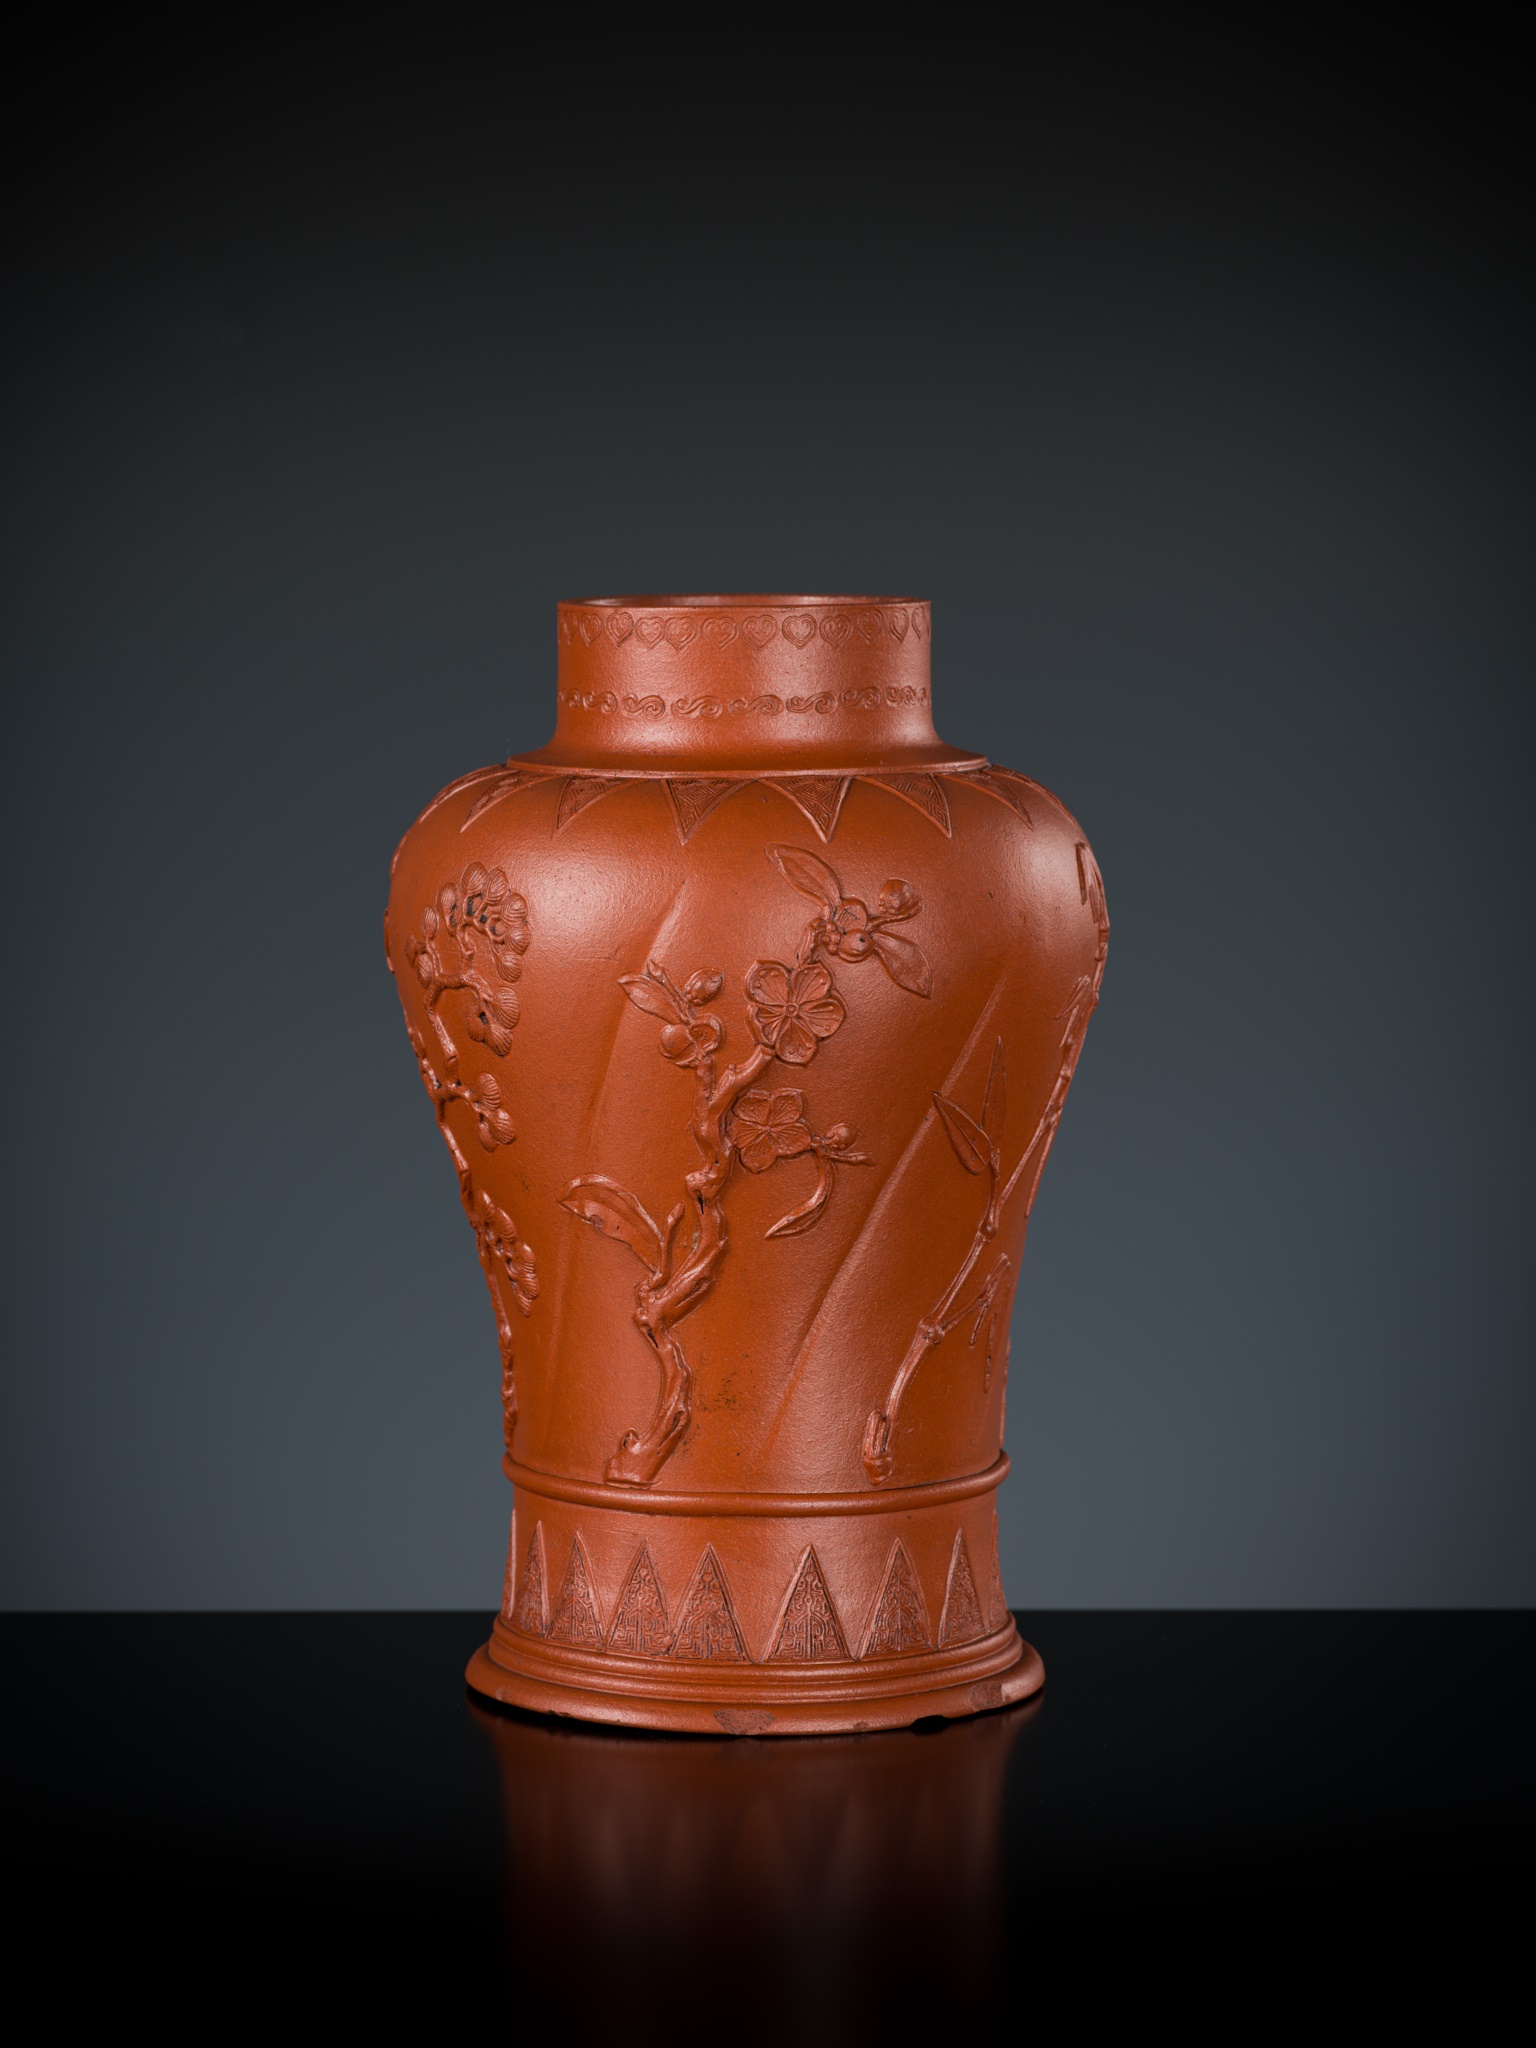 Lot 199 - A YIXING RED STONEWARE VASE, BY CHEN ZIWEN,